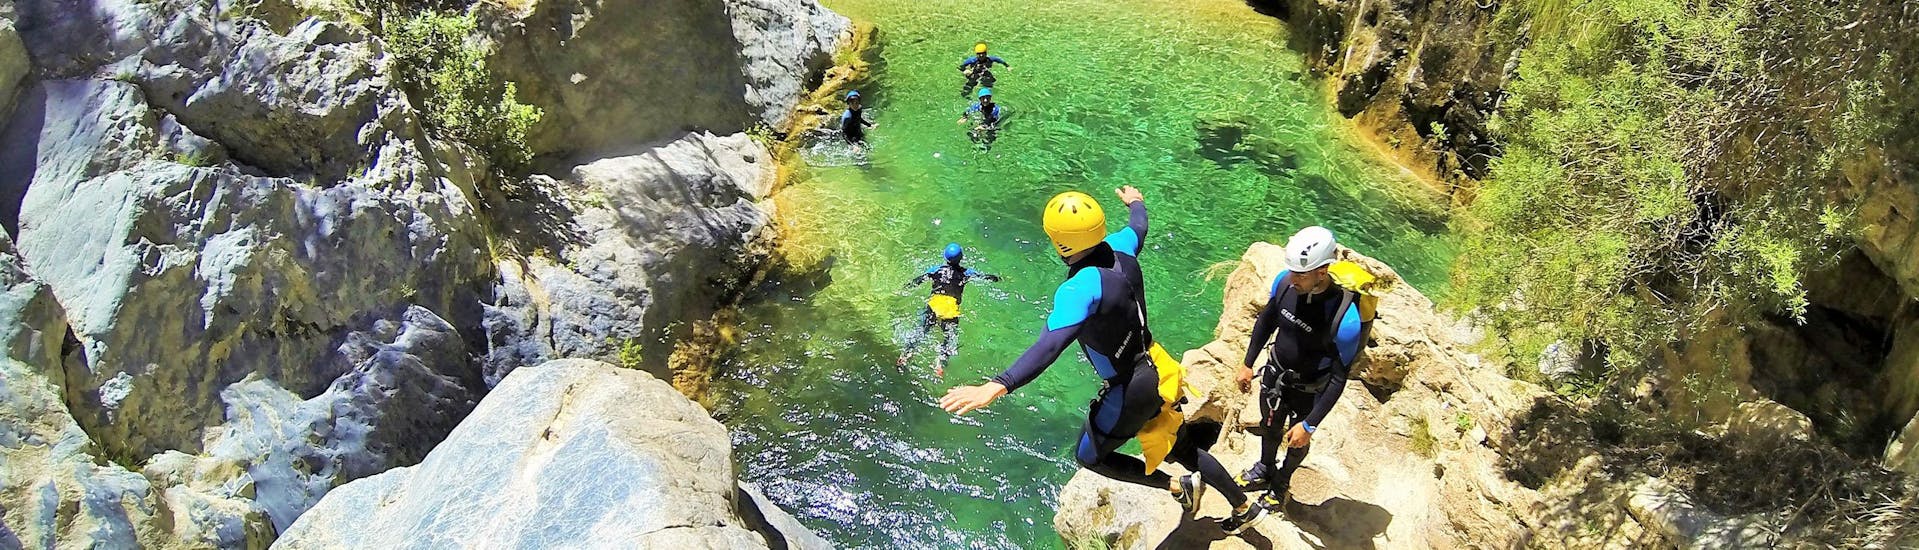 A group of friends jump from the cliff into the crystal clear water during the Canyoning Beginner Tour in Rio Verde, organized by Barranquismo Rio Verde.